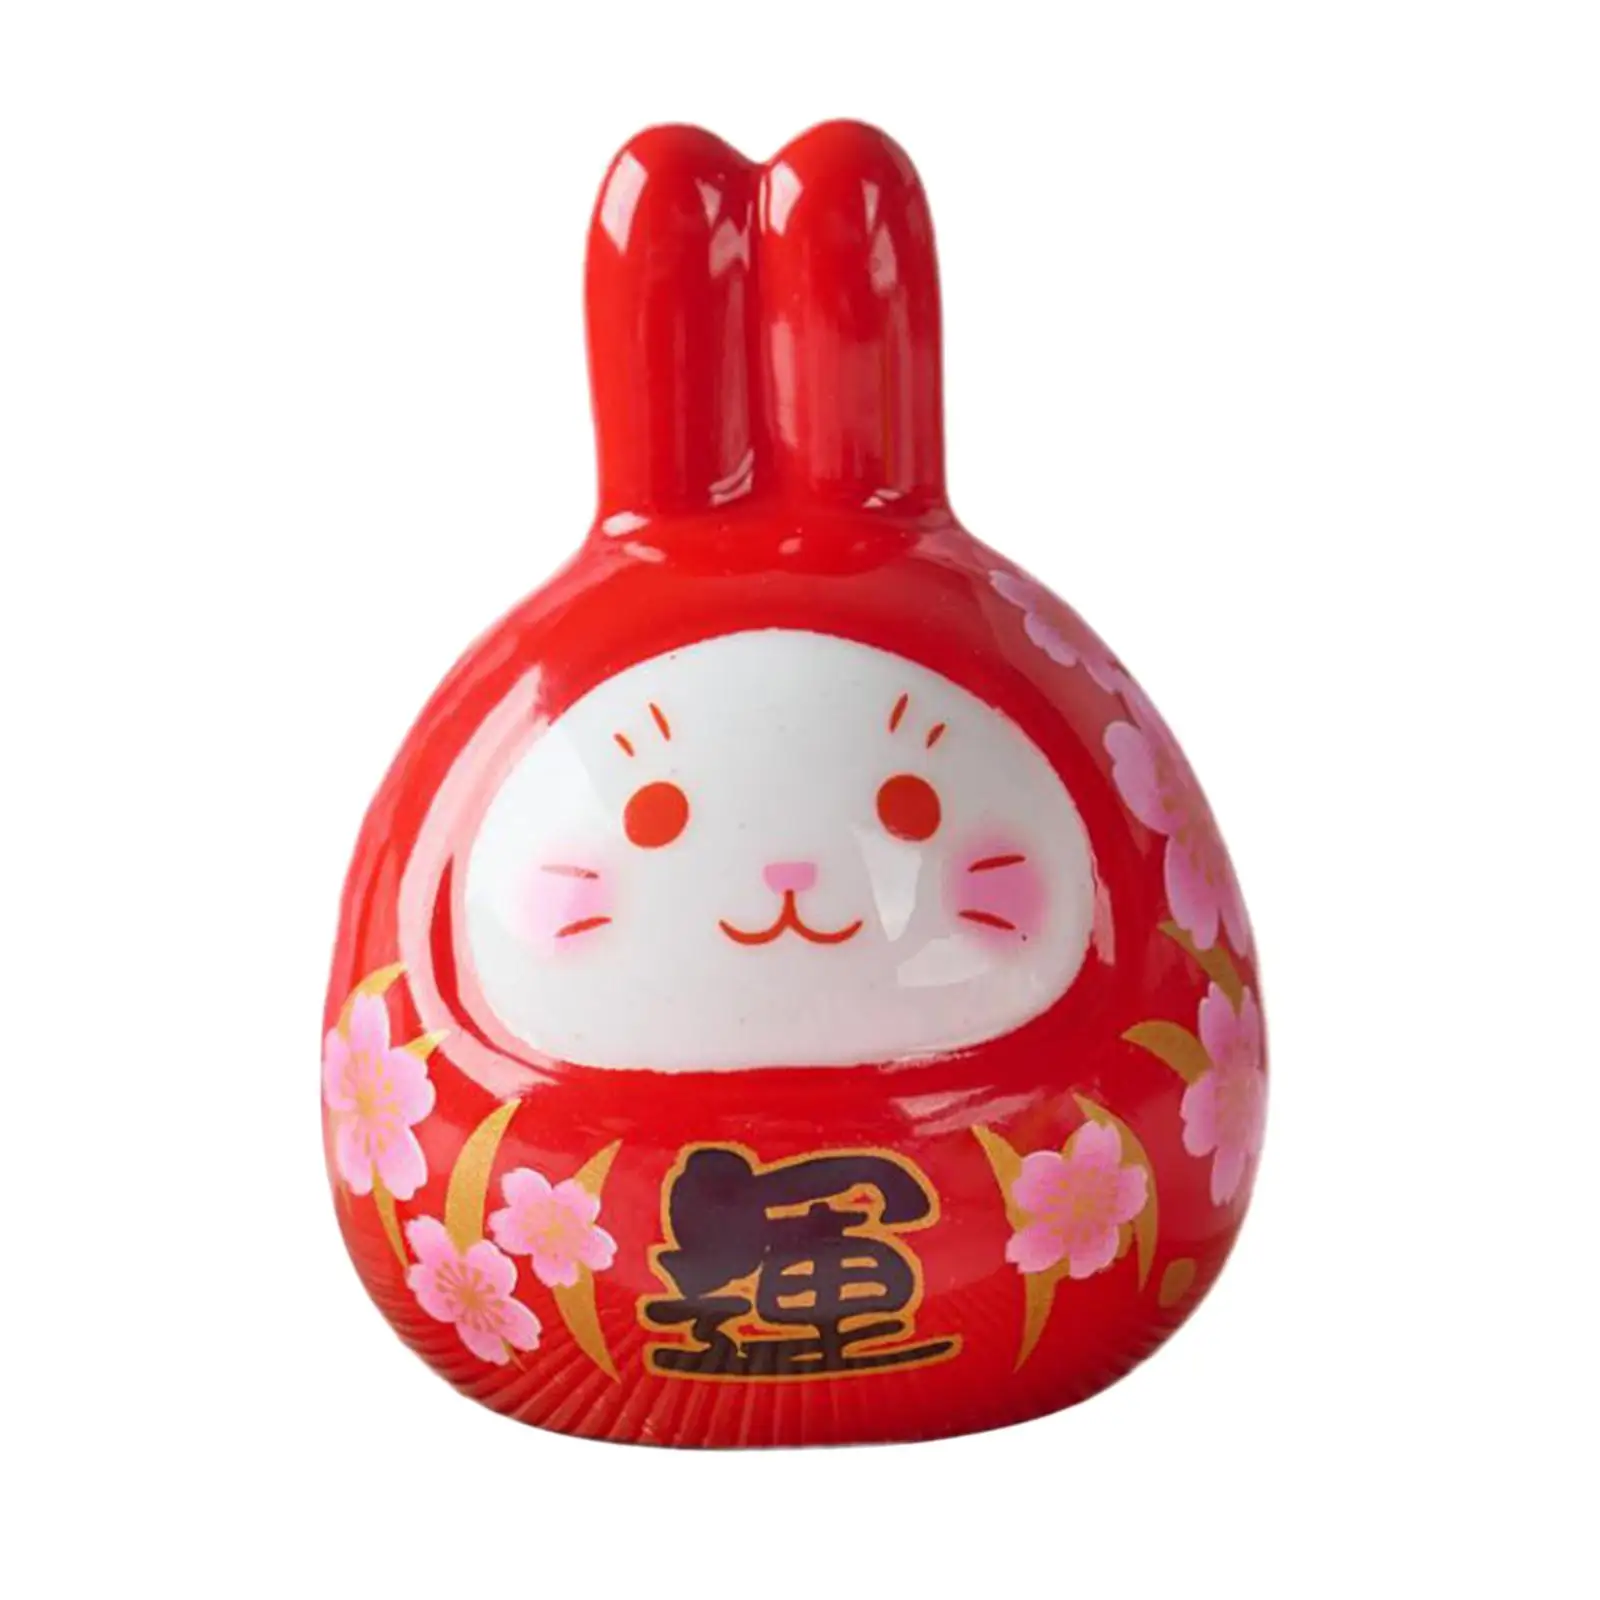 Chinese New Year Rabbit Statue Ceramic Miniature Craft for Office Spring Festival Decor